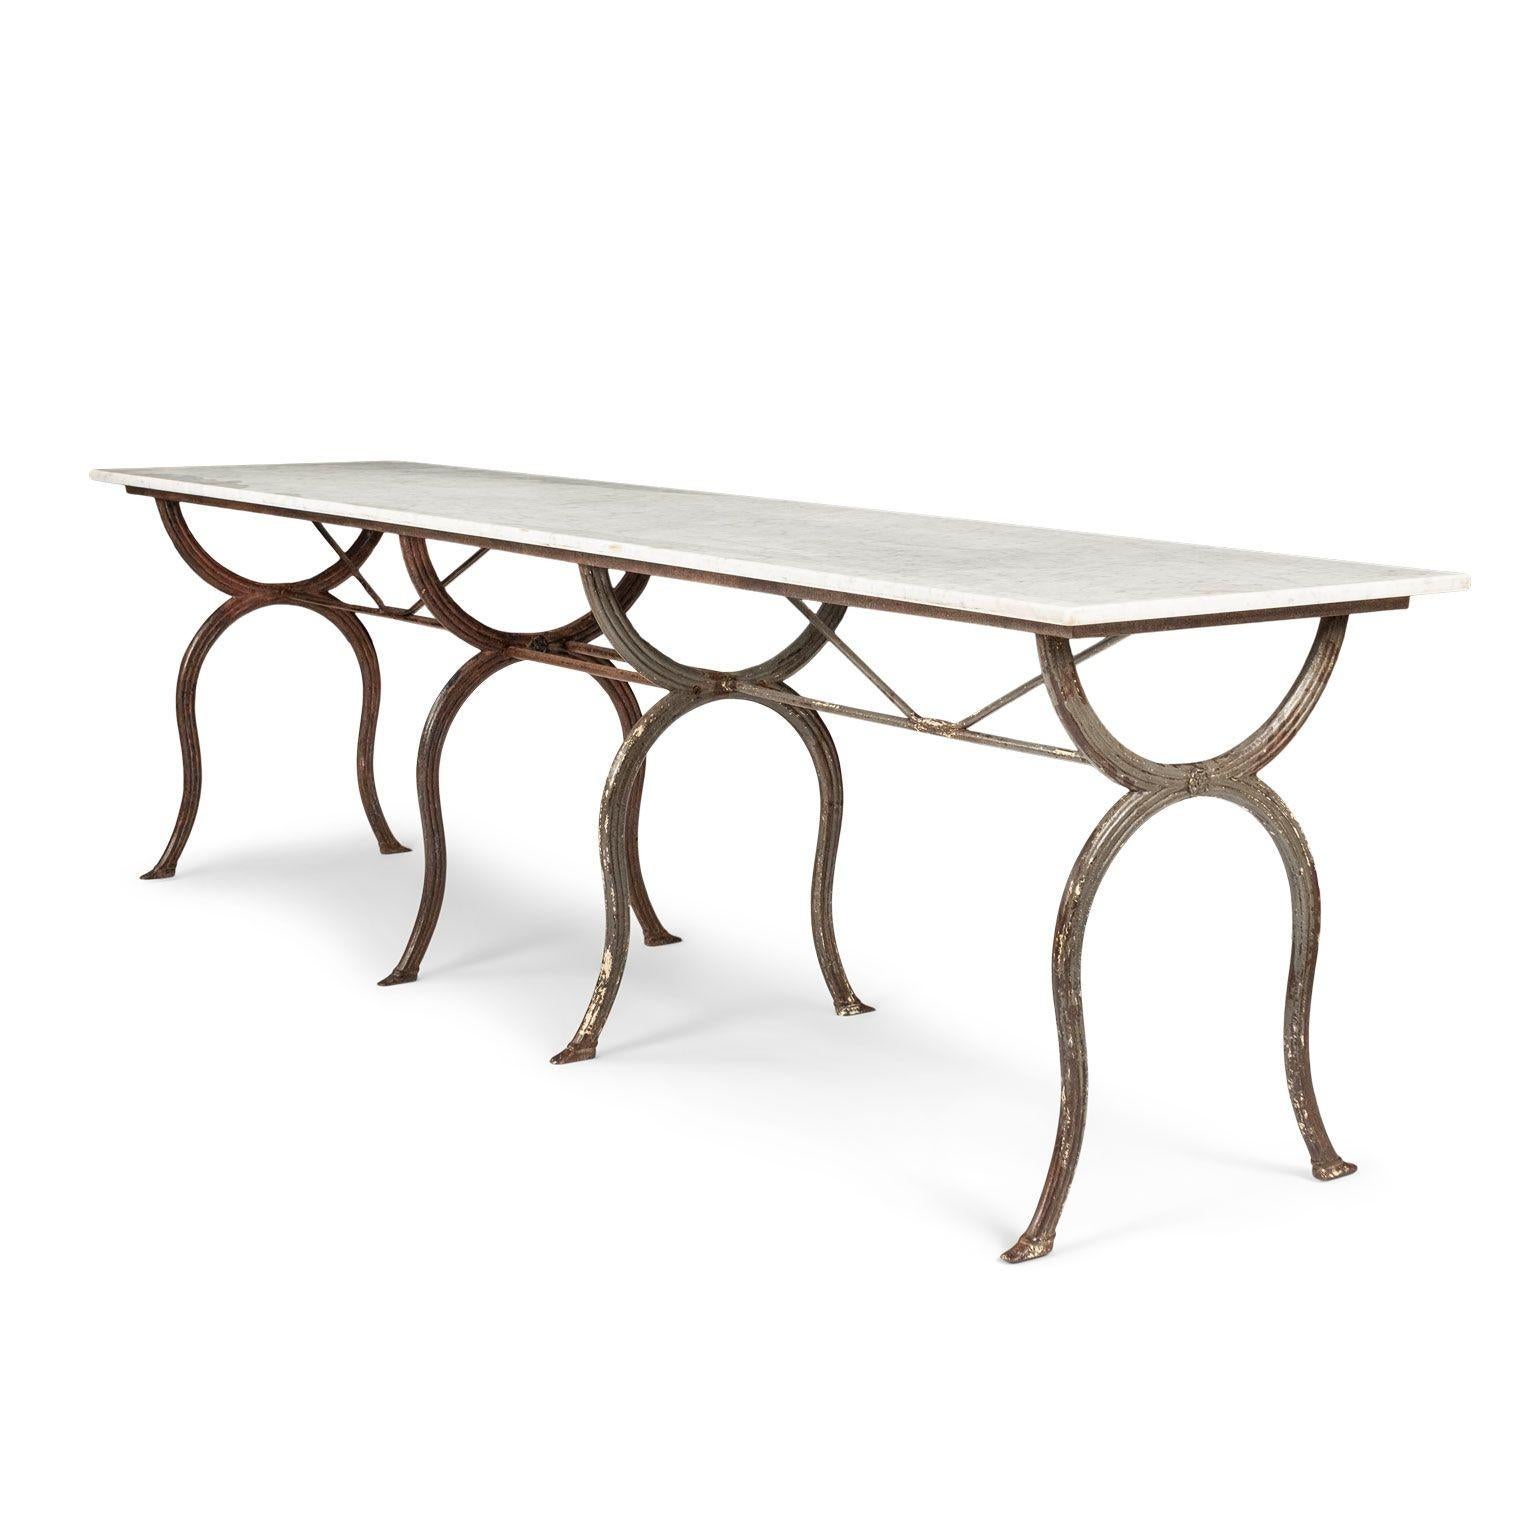 Rectangular white marble top iron base table, made in France during the turn of the 19th-to-20th century. Graceful reeded base with remnants of early white and dark gray paint supports white marble top. Medium and light veins of gray adorn the white